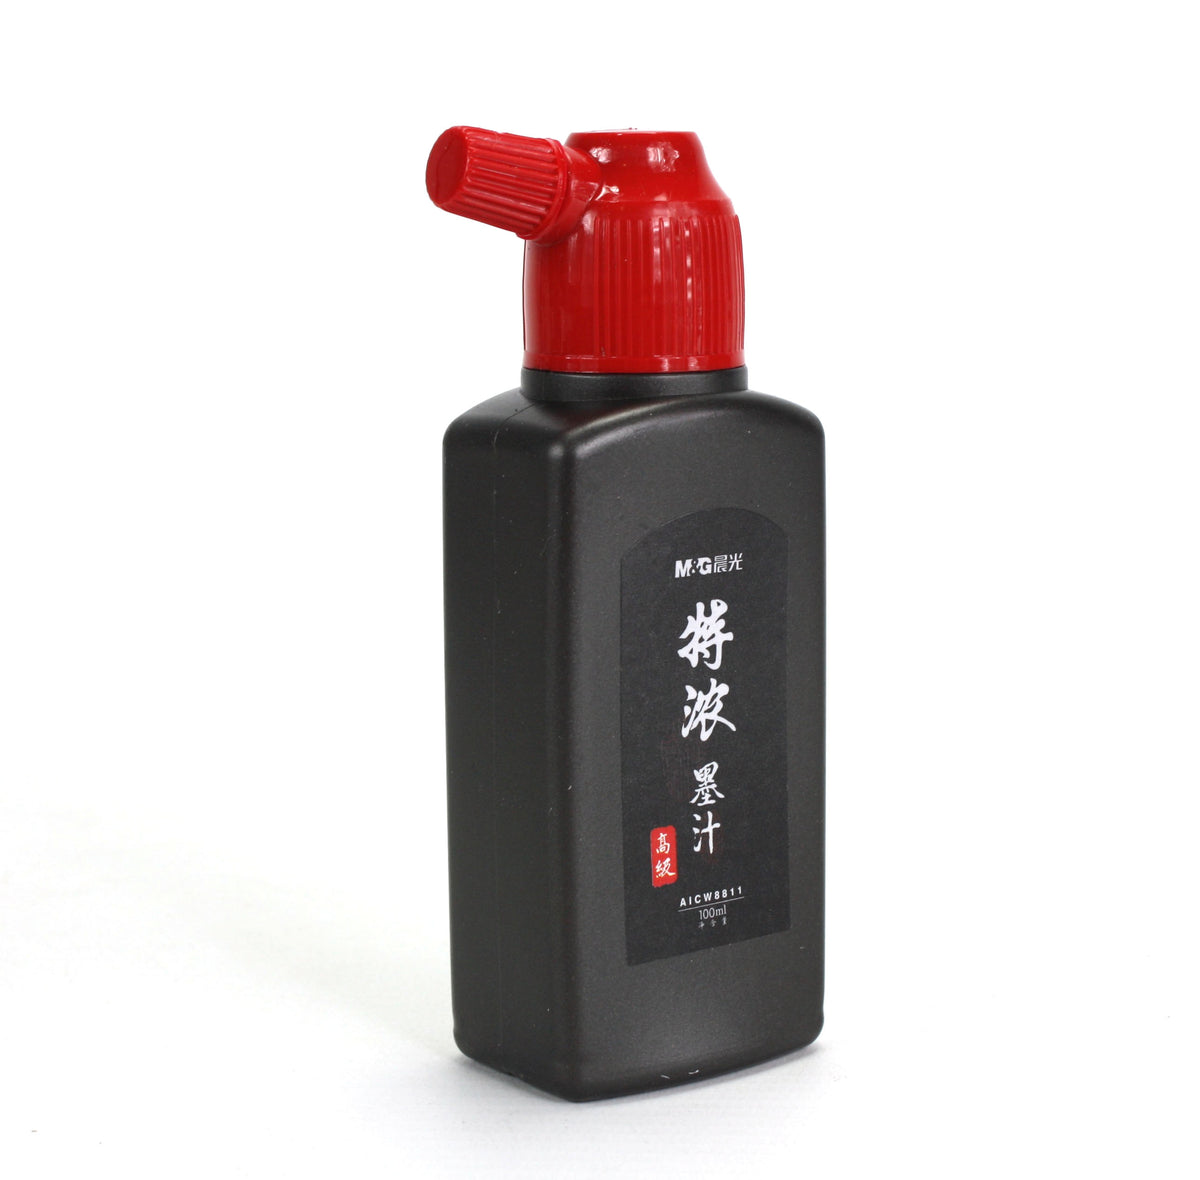 Chinese sumi-e Calligraphy Drawing Ink, Black, AICW8811, from M&amp;G - farangshop-co